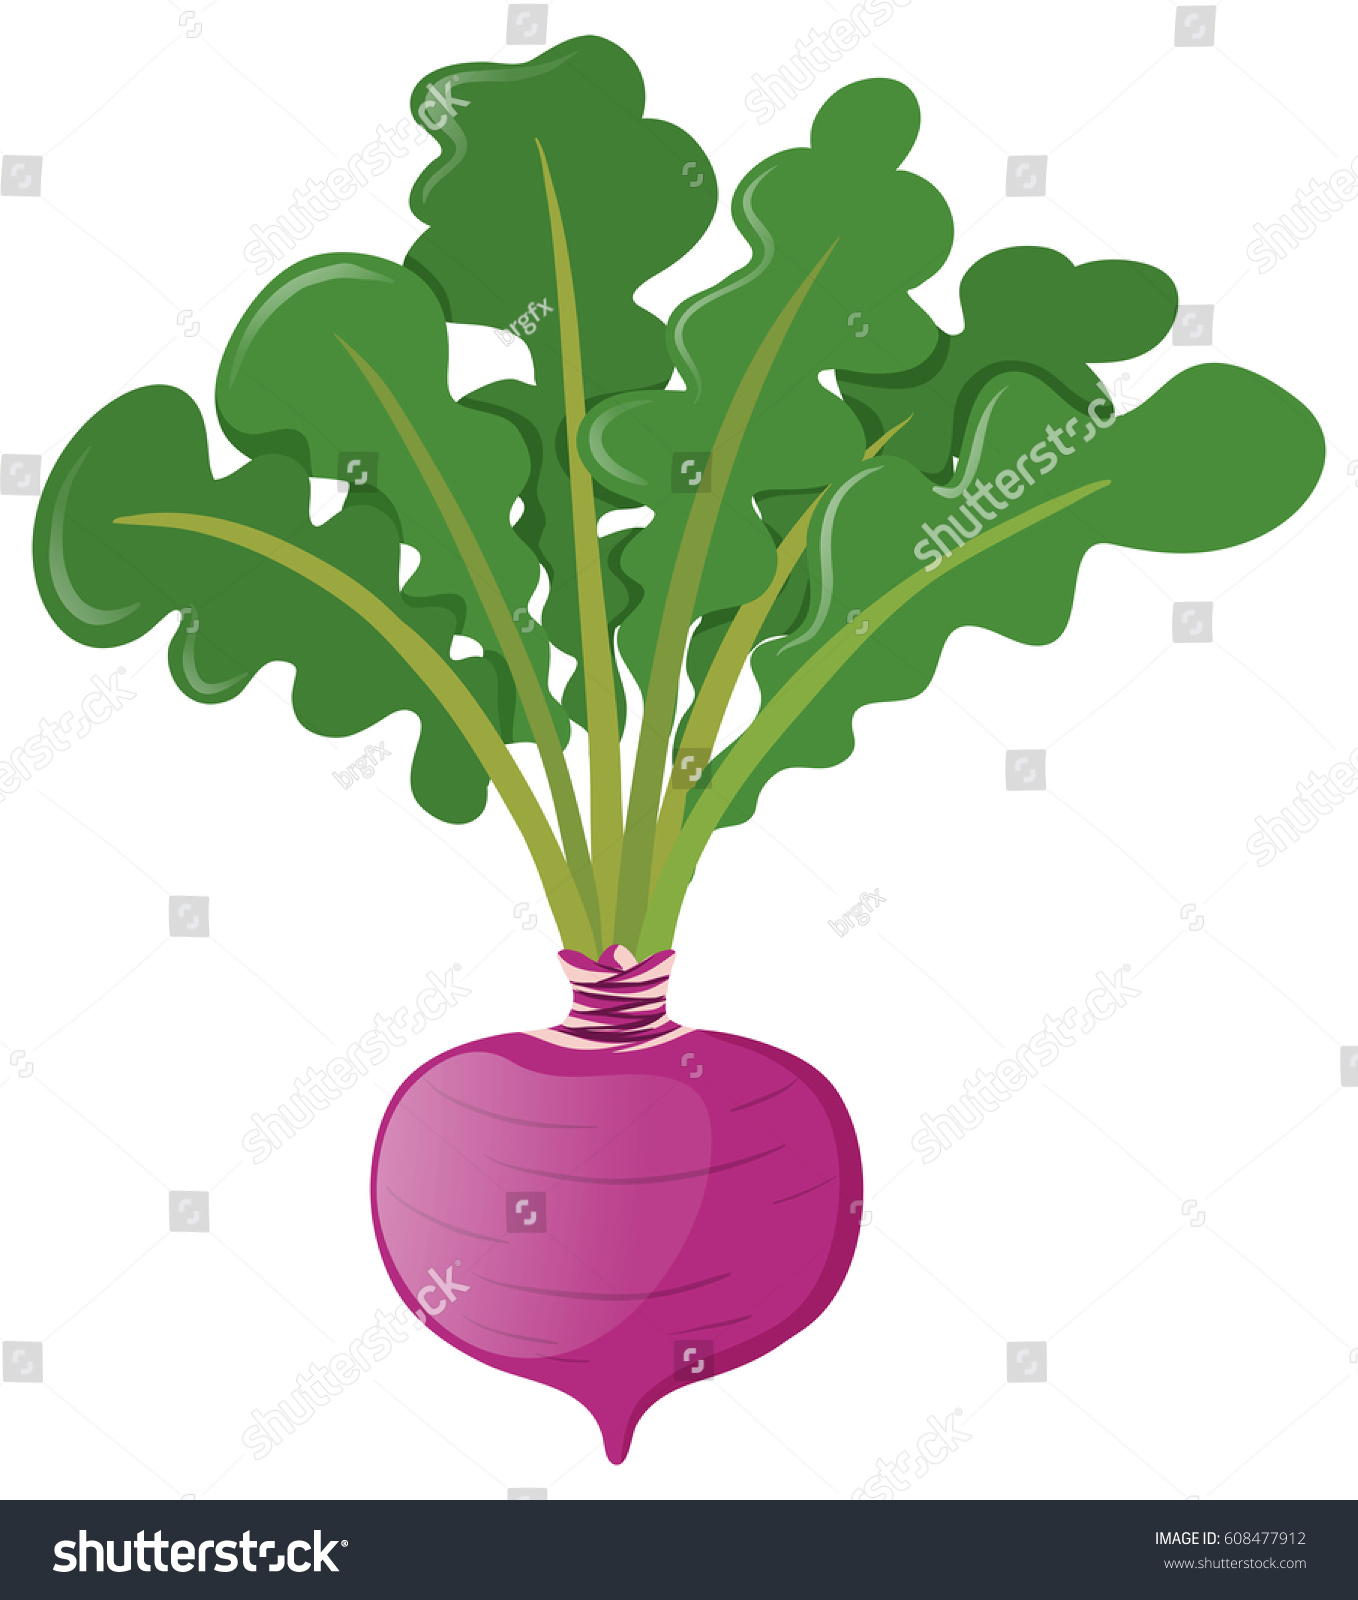 free clipart beets - photo #45